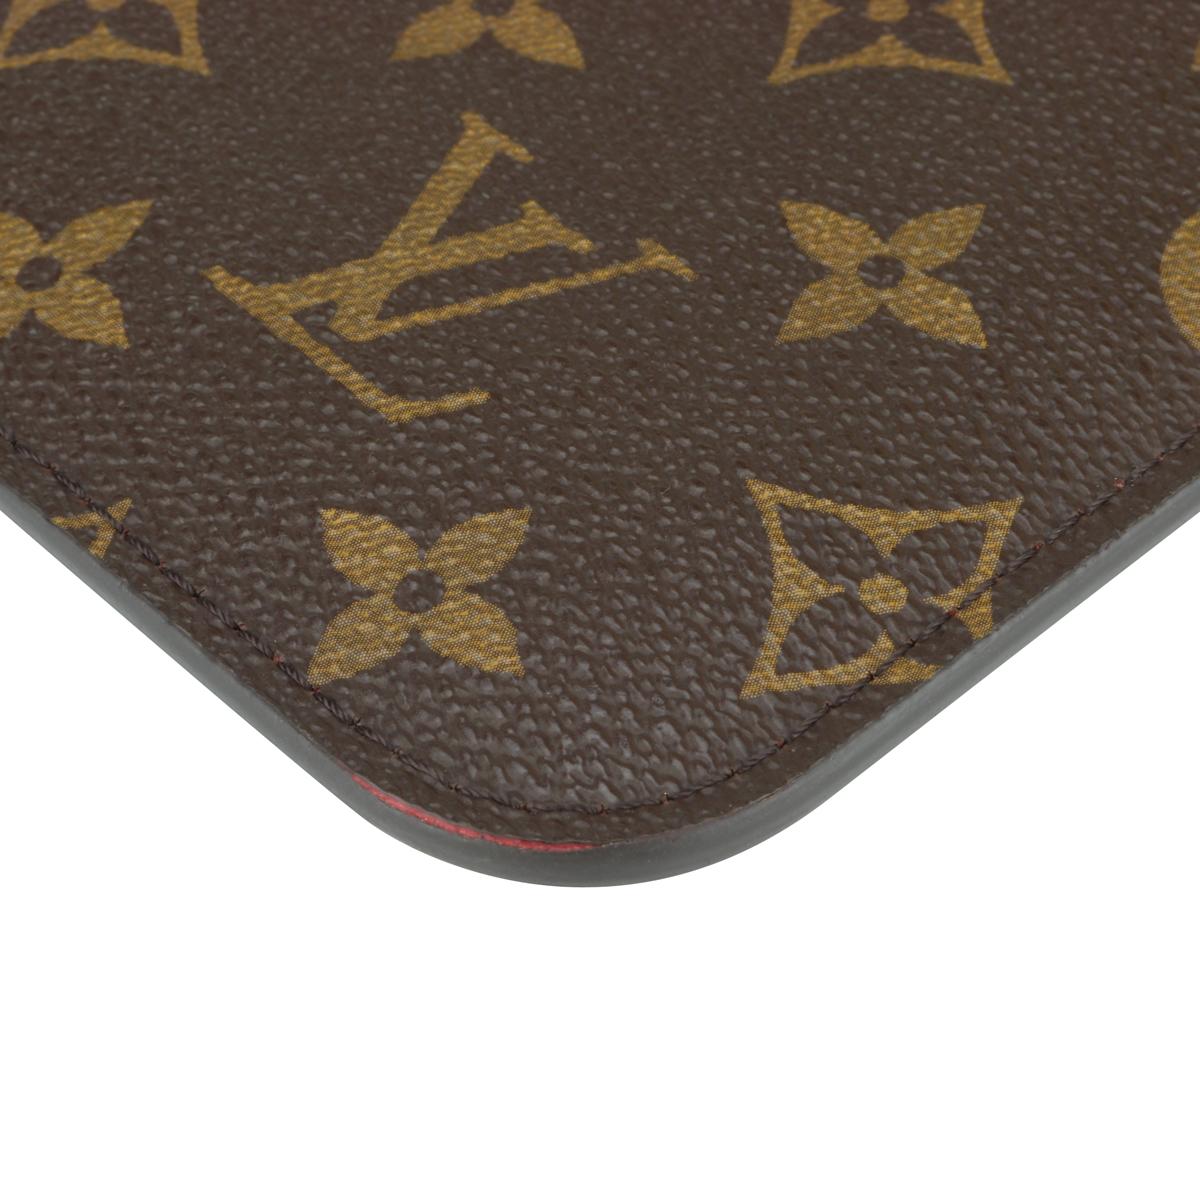 Louis Vuitton Neverfull MM Pochette Pouch in Monogram with Red Interior 2019 6